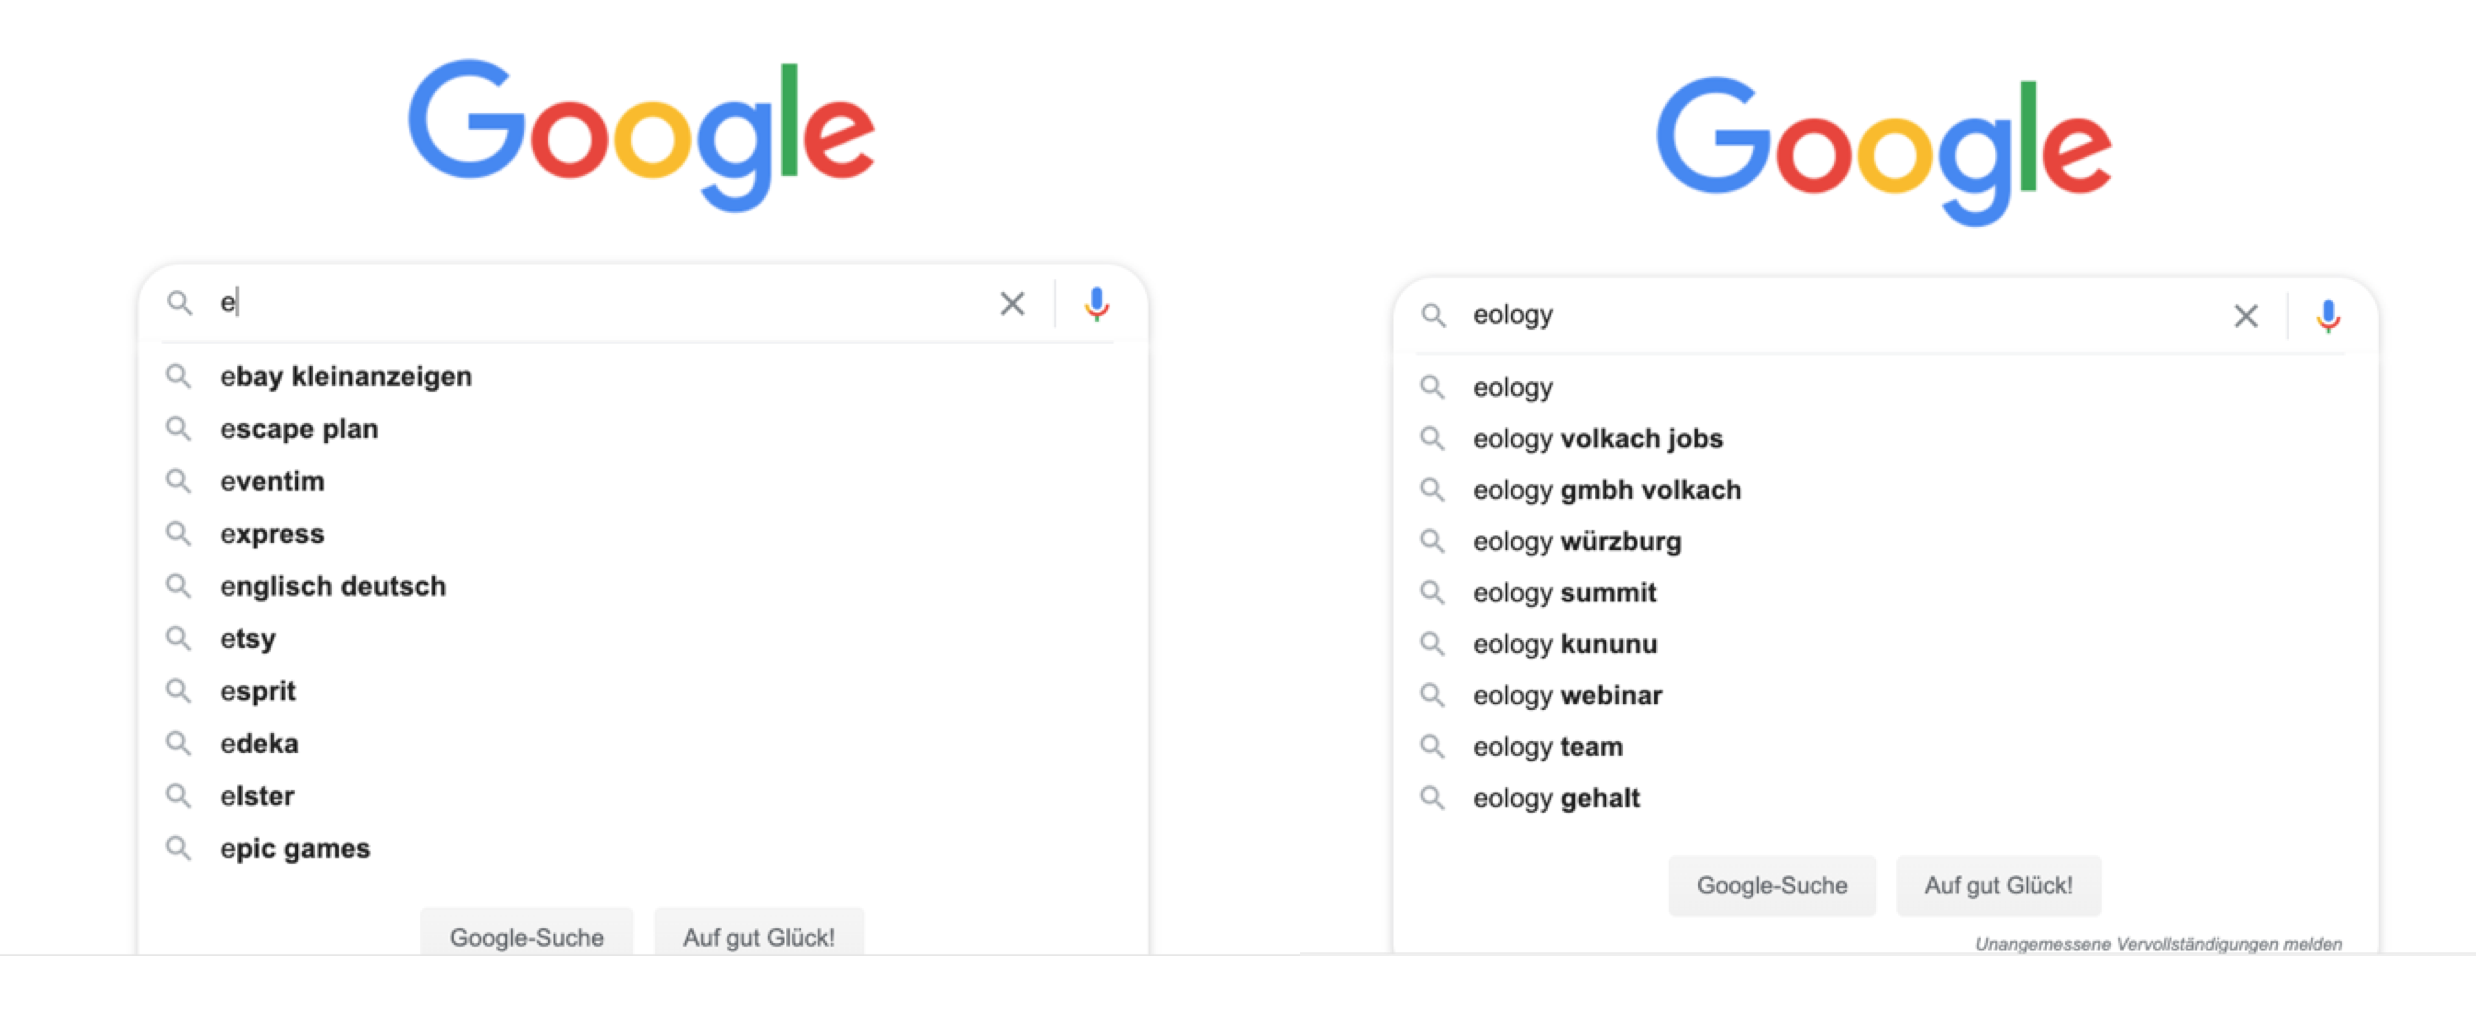 Google Suggests suggestions for the letter "E" and the keyword "eology